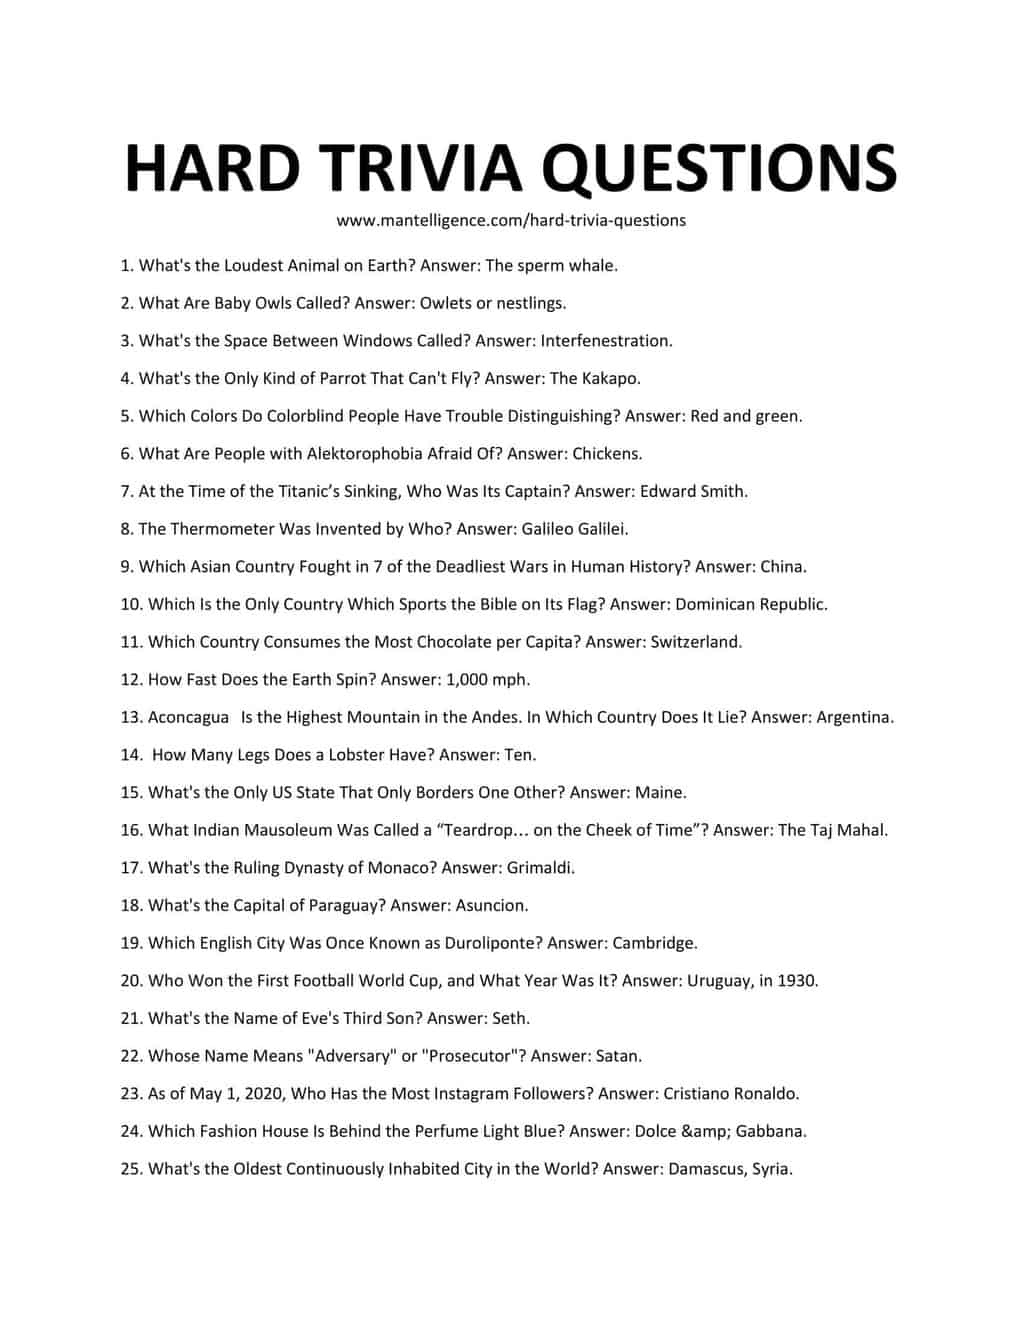 Hard Trivia Questions With Answers